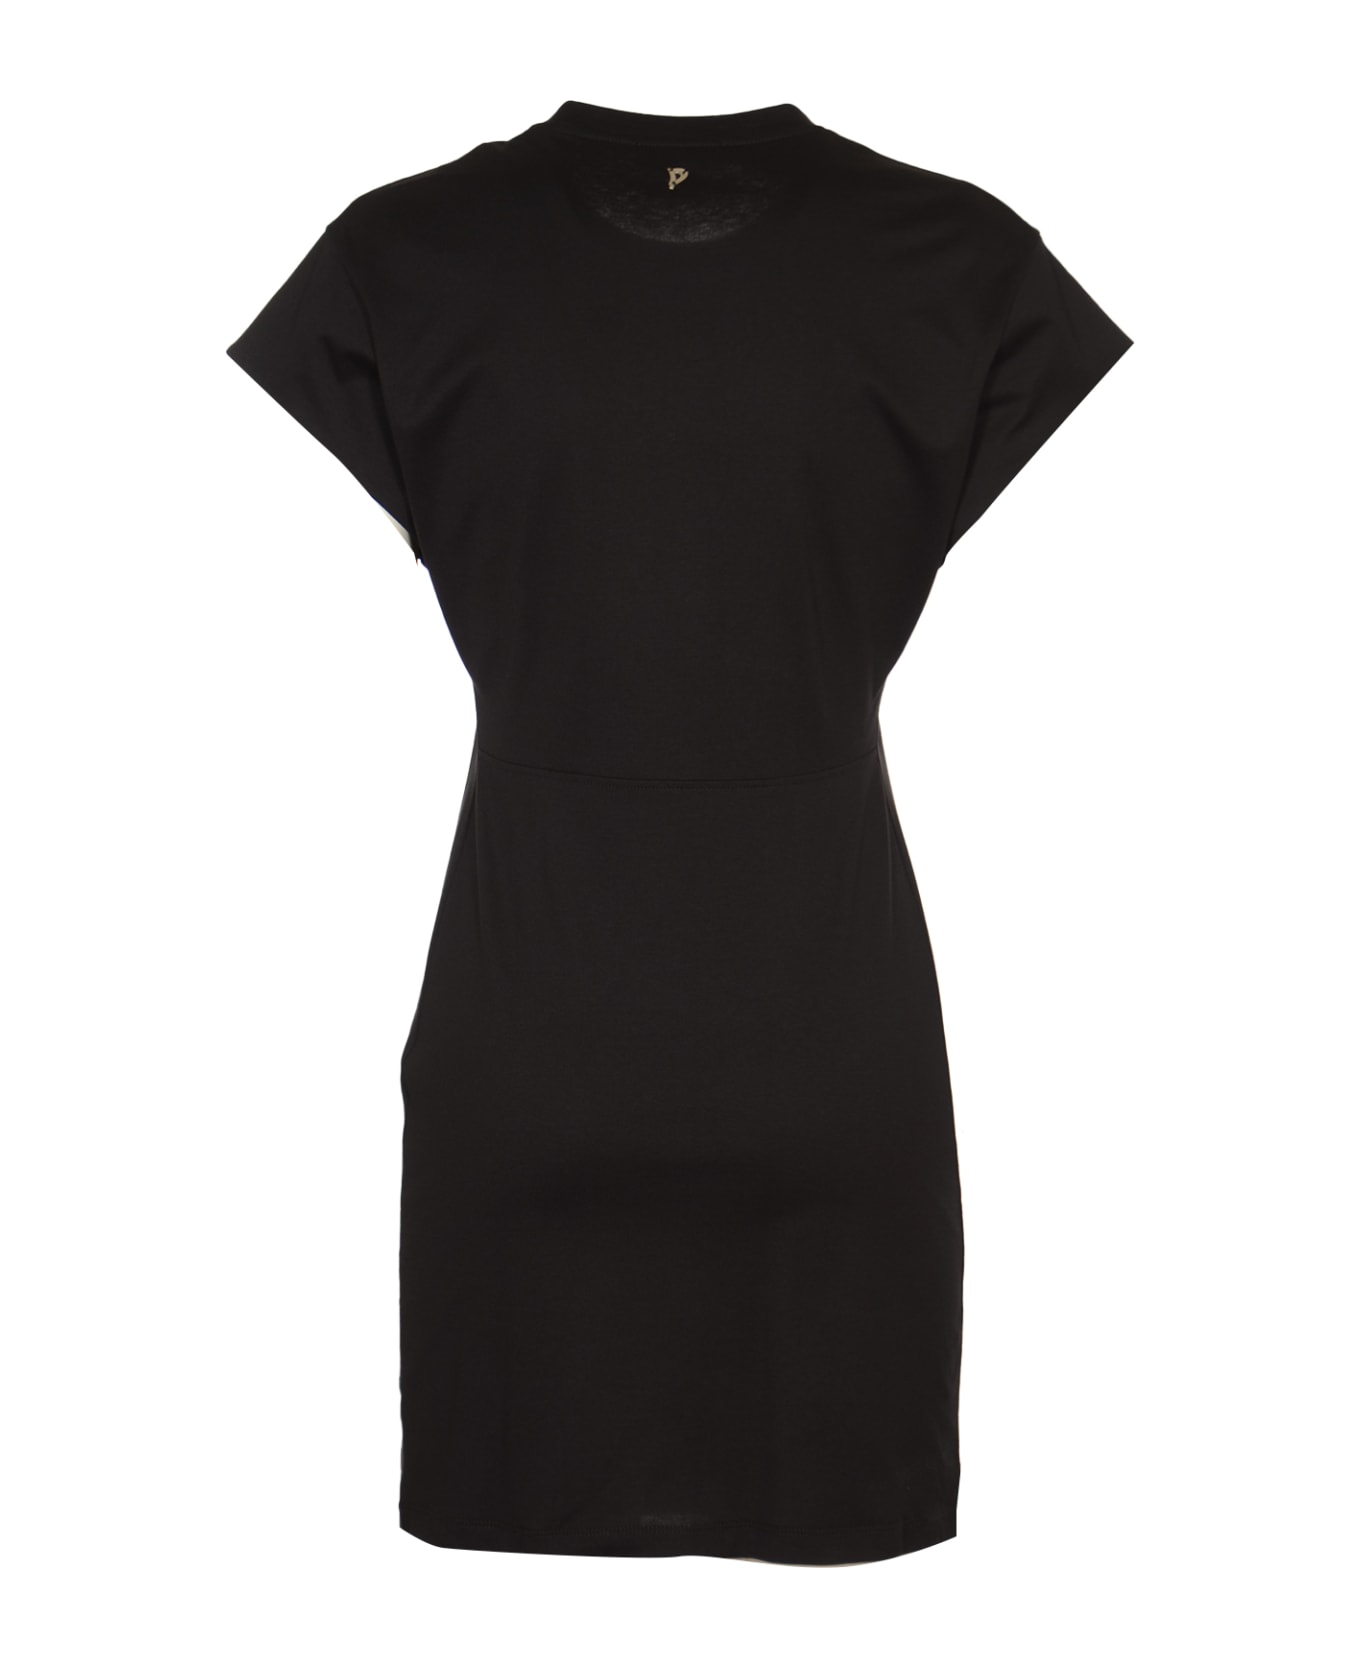 Dondup Capped Sleeve Dress